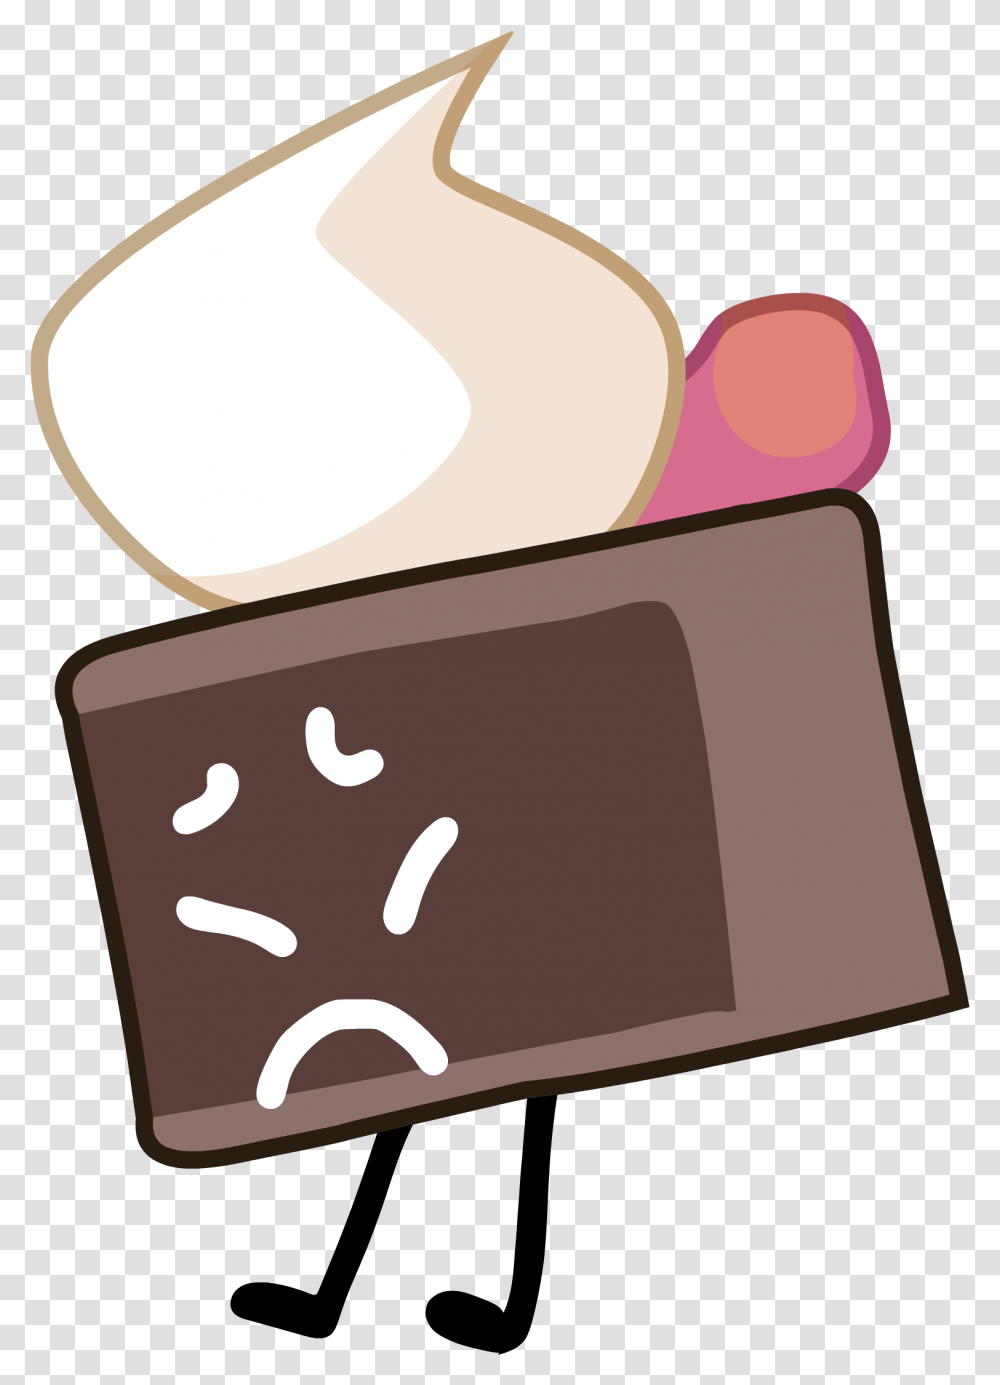 Image Loser Cake Battle For Dream Bfb The Losers Cake, Axe, Page Transparent Png